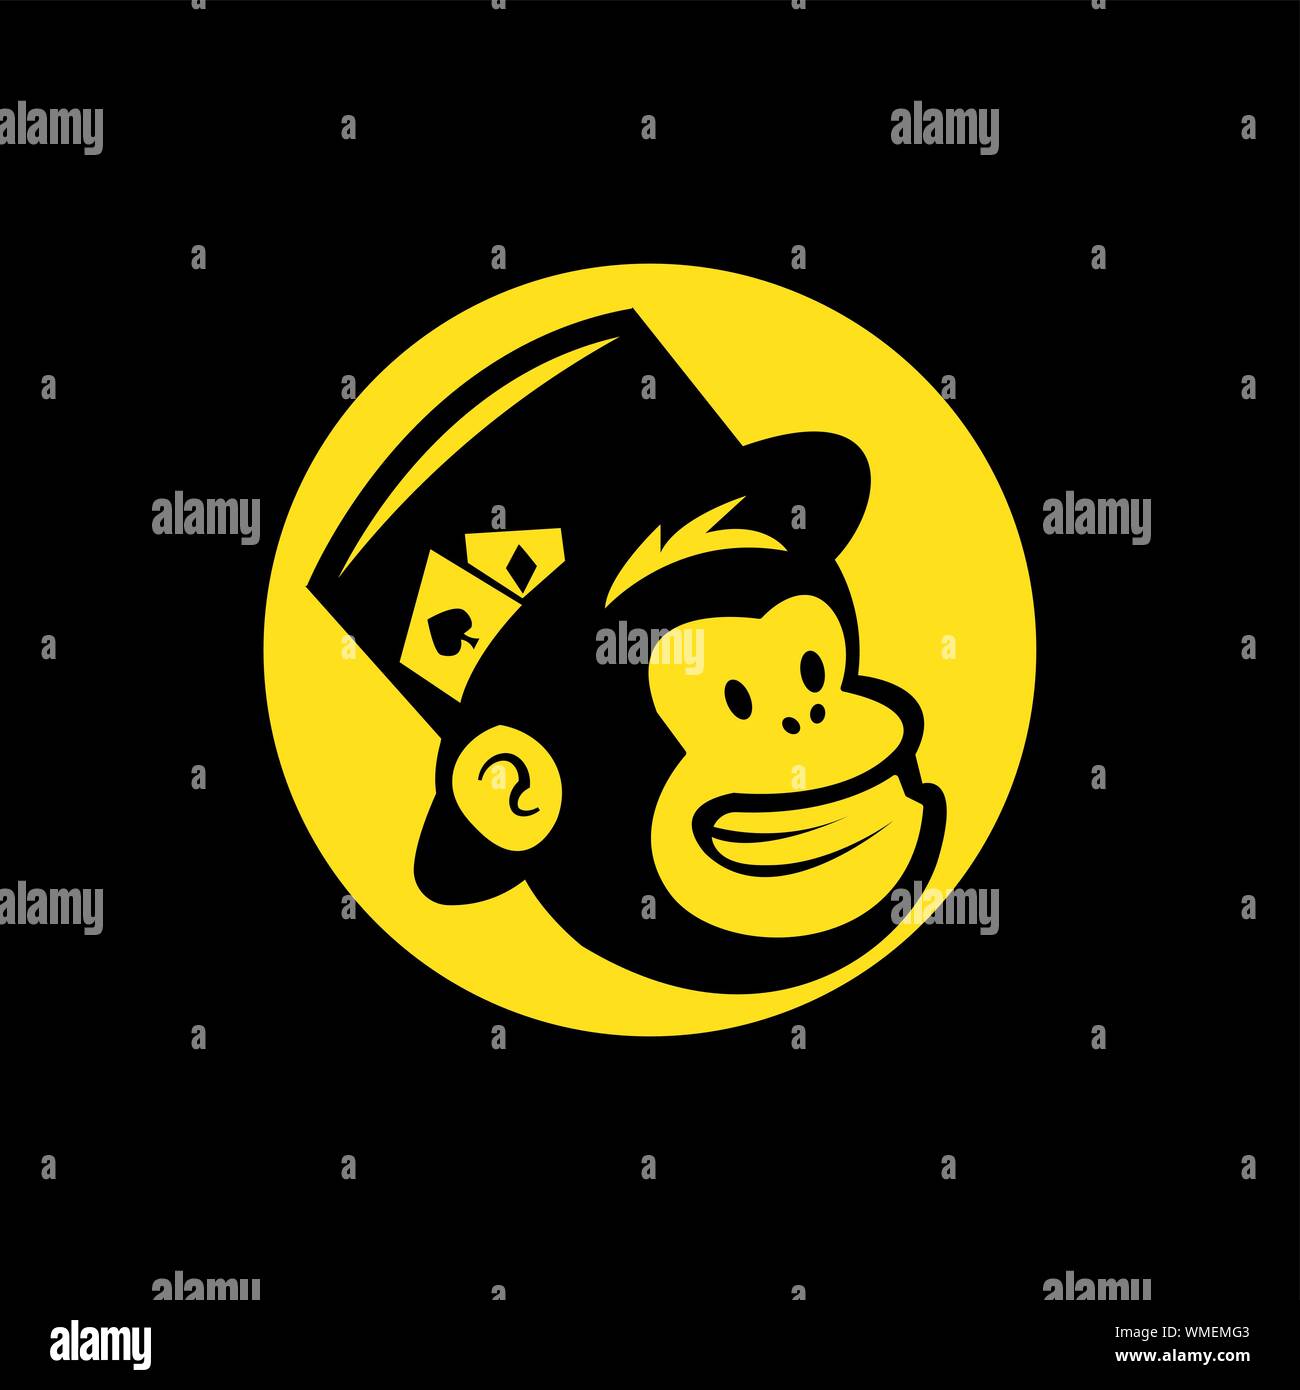 vector head of a magician monkey inside a yellow circle, in black baground Stock Vector